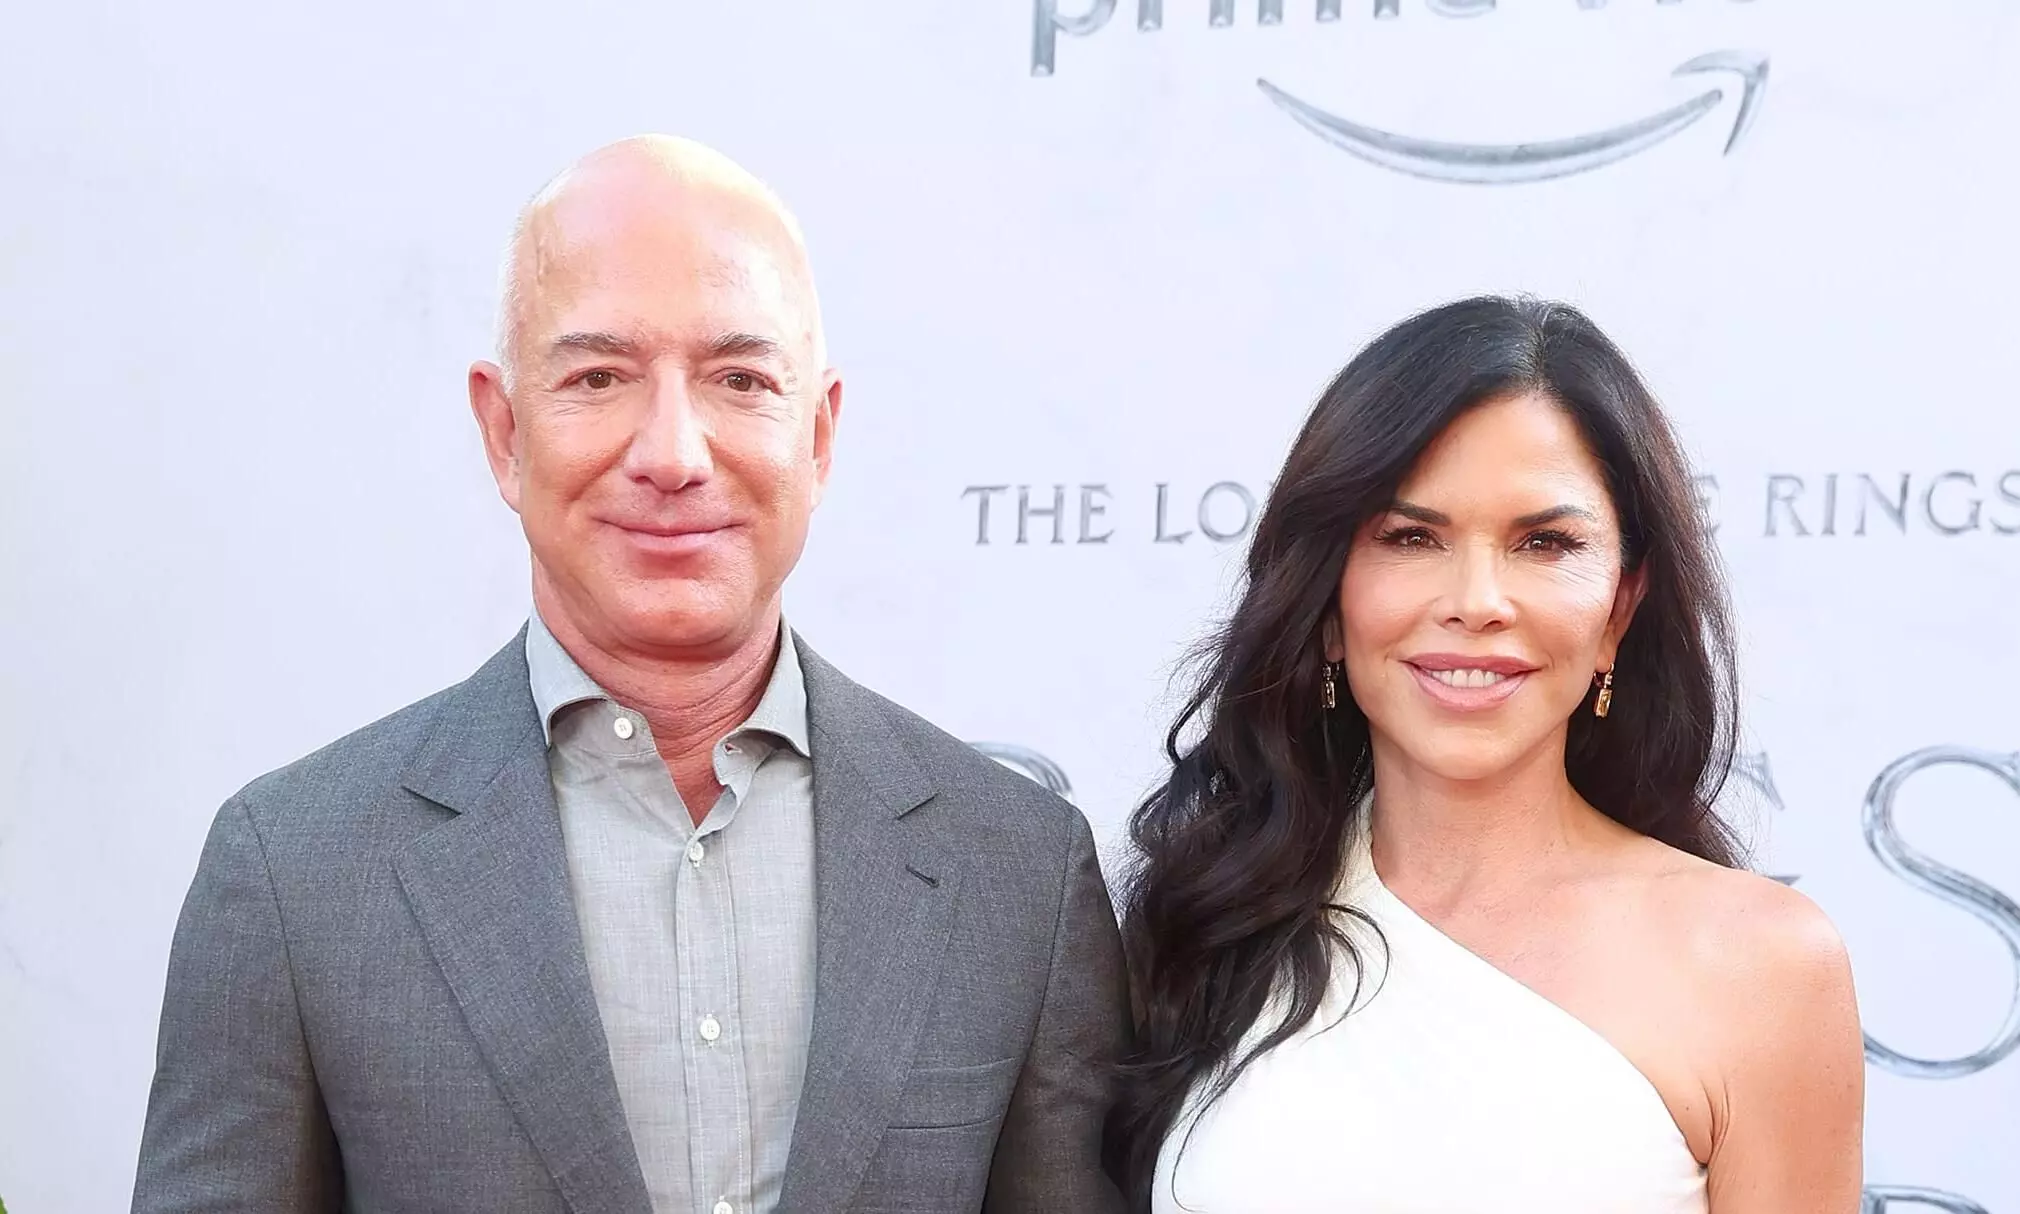 Bezos, Sanchez to give $100 mn to support Hawaii recover from wildfire